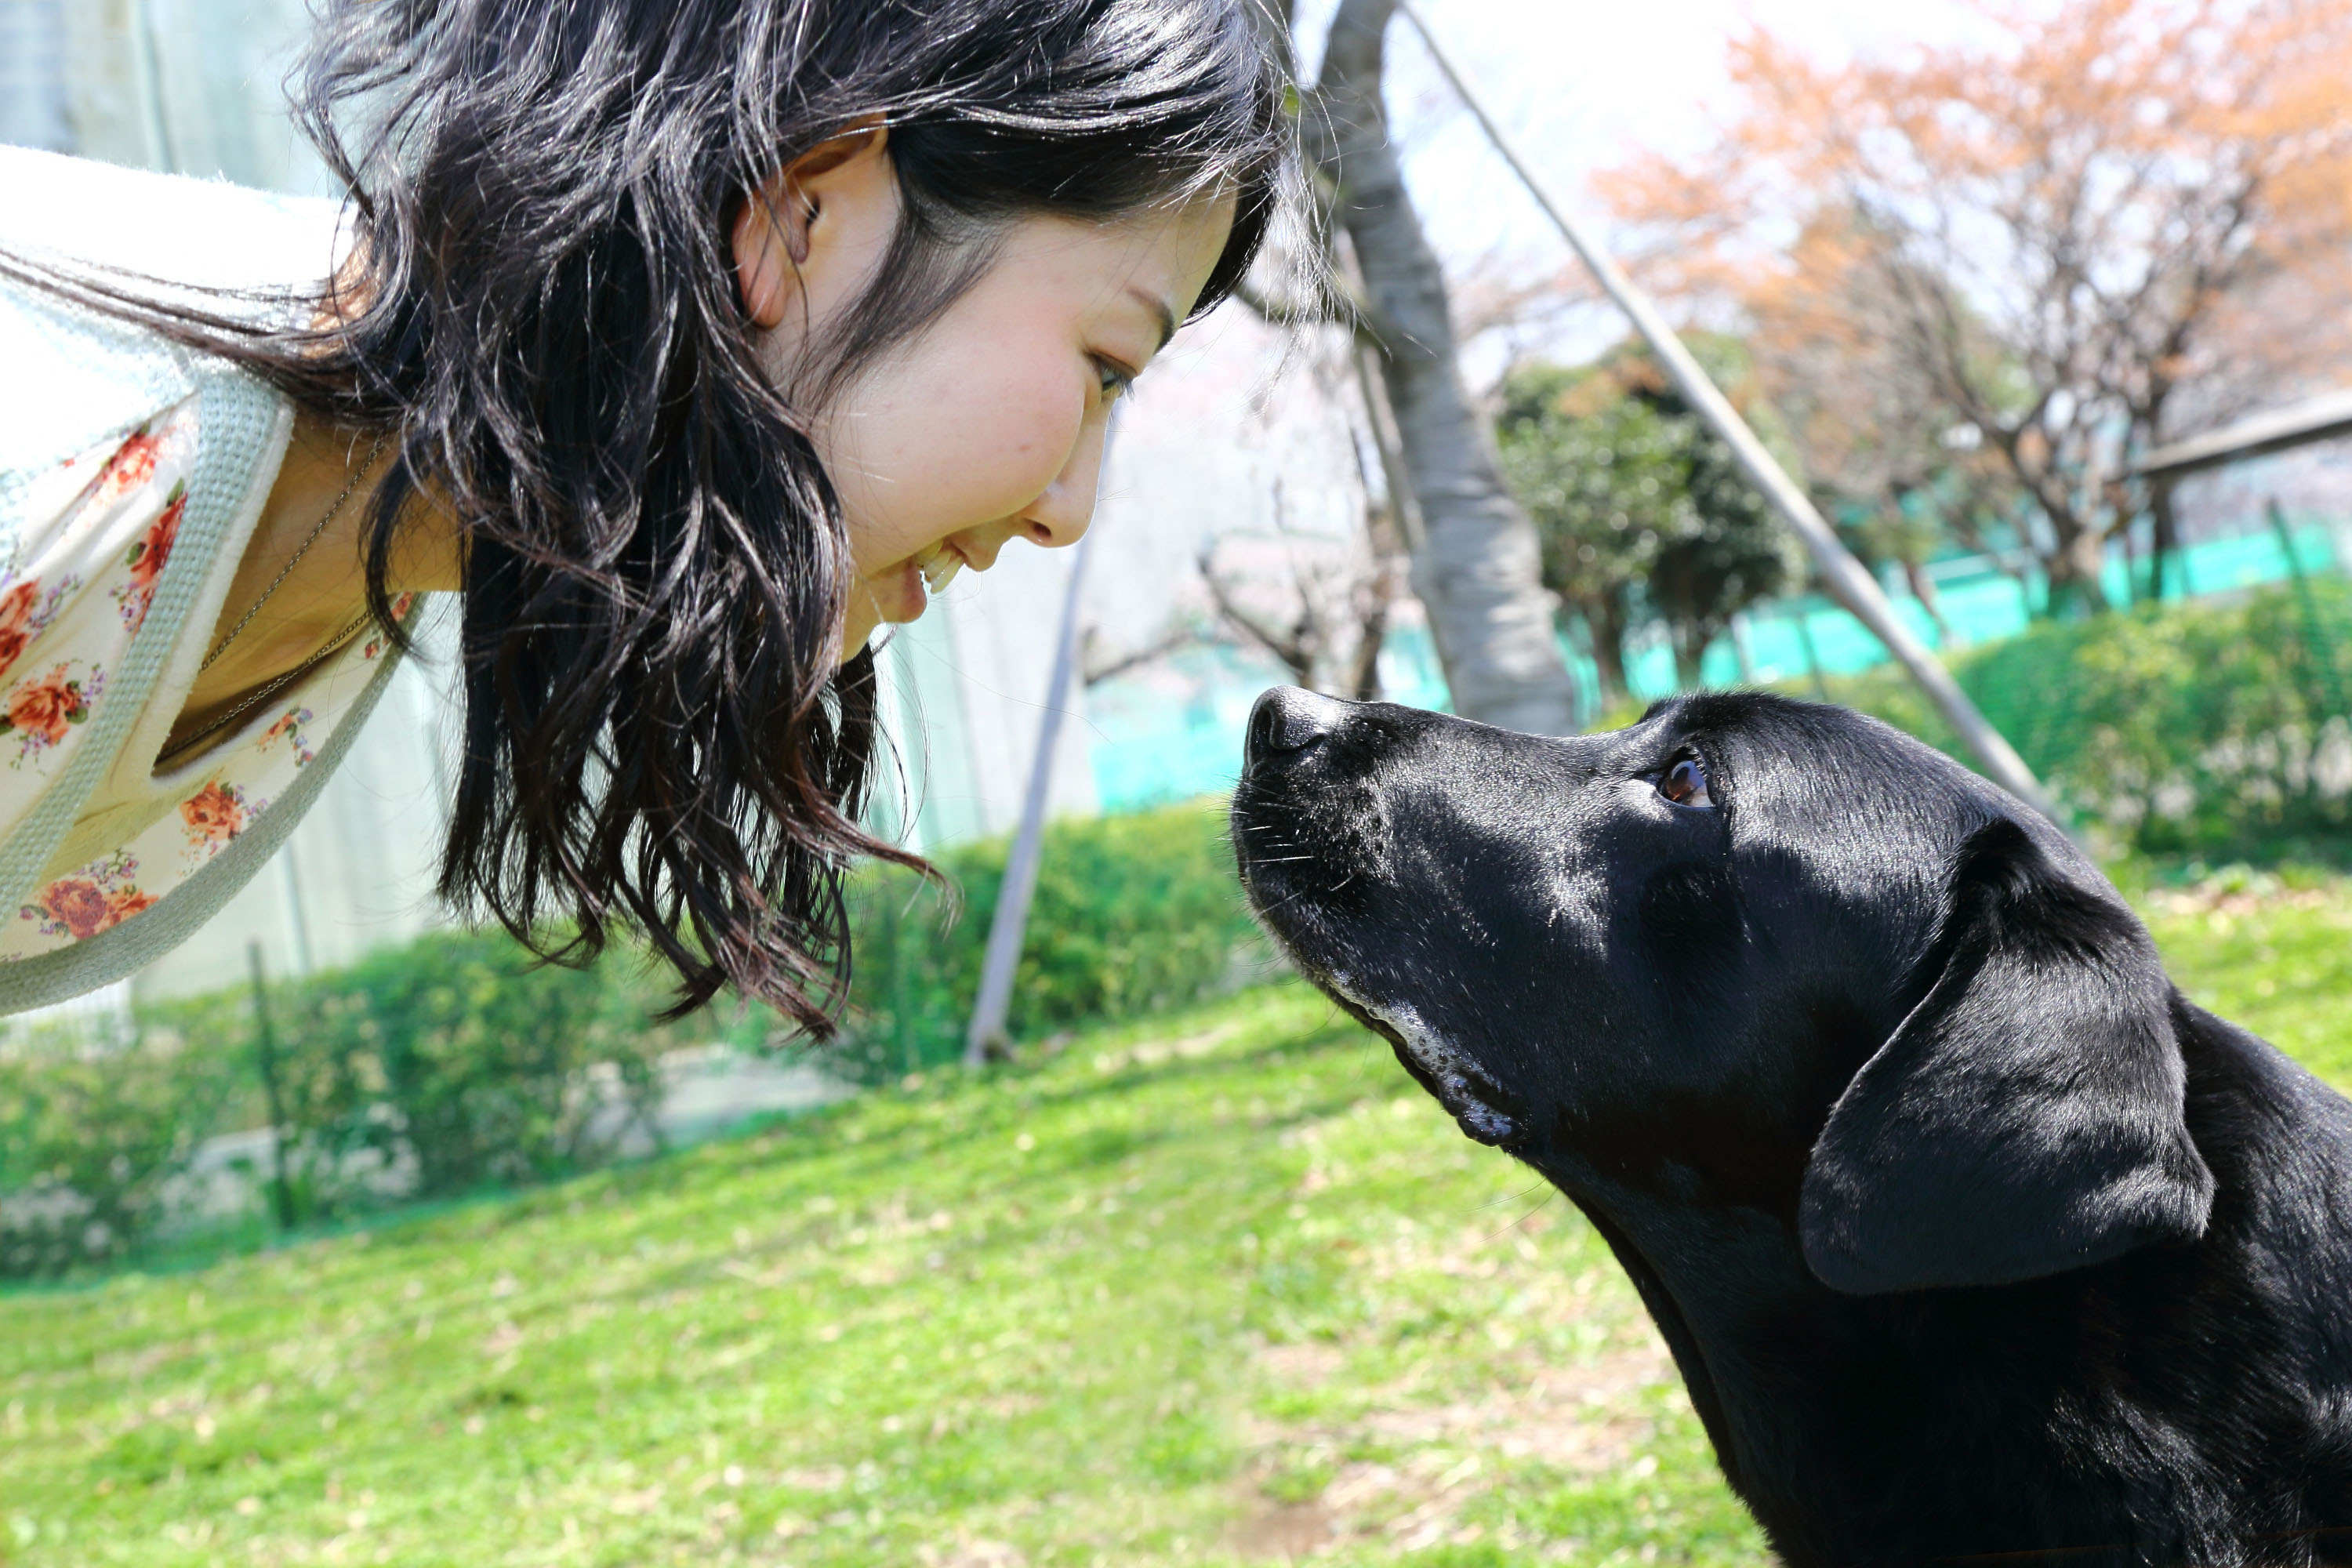 Dogs and people bond through eye contact - CBS News3000 x 2000